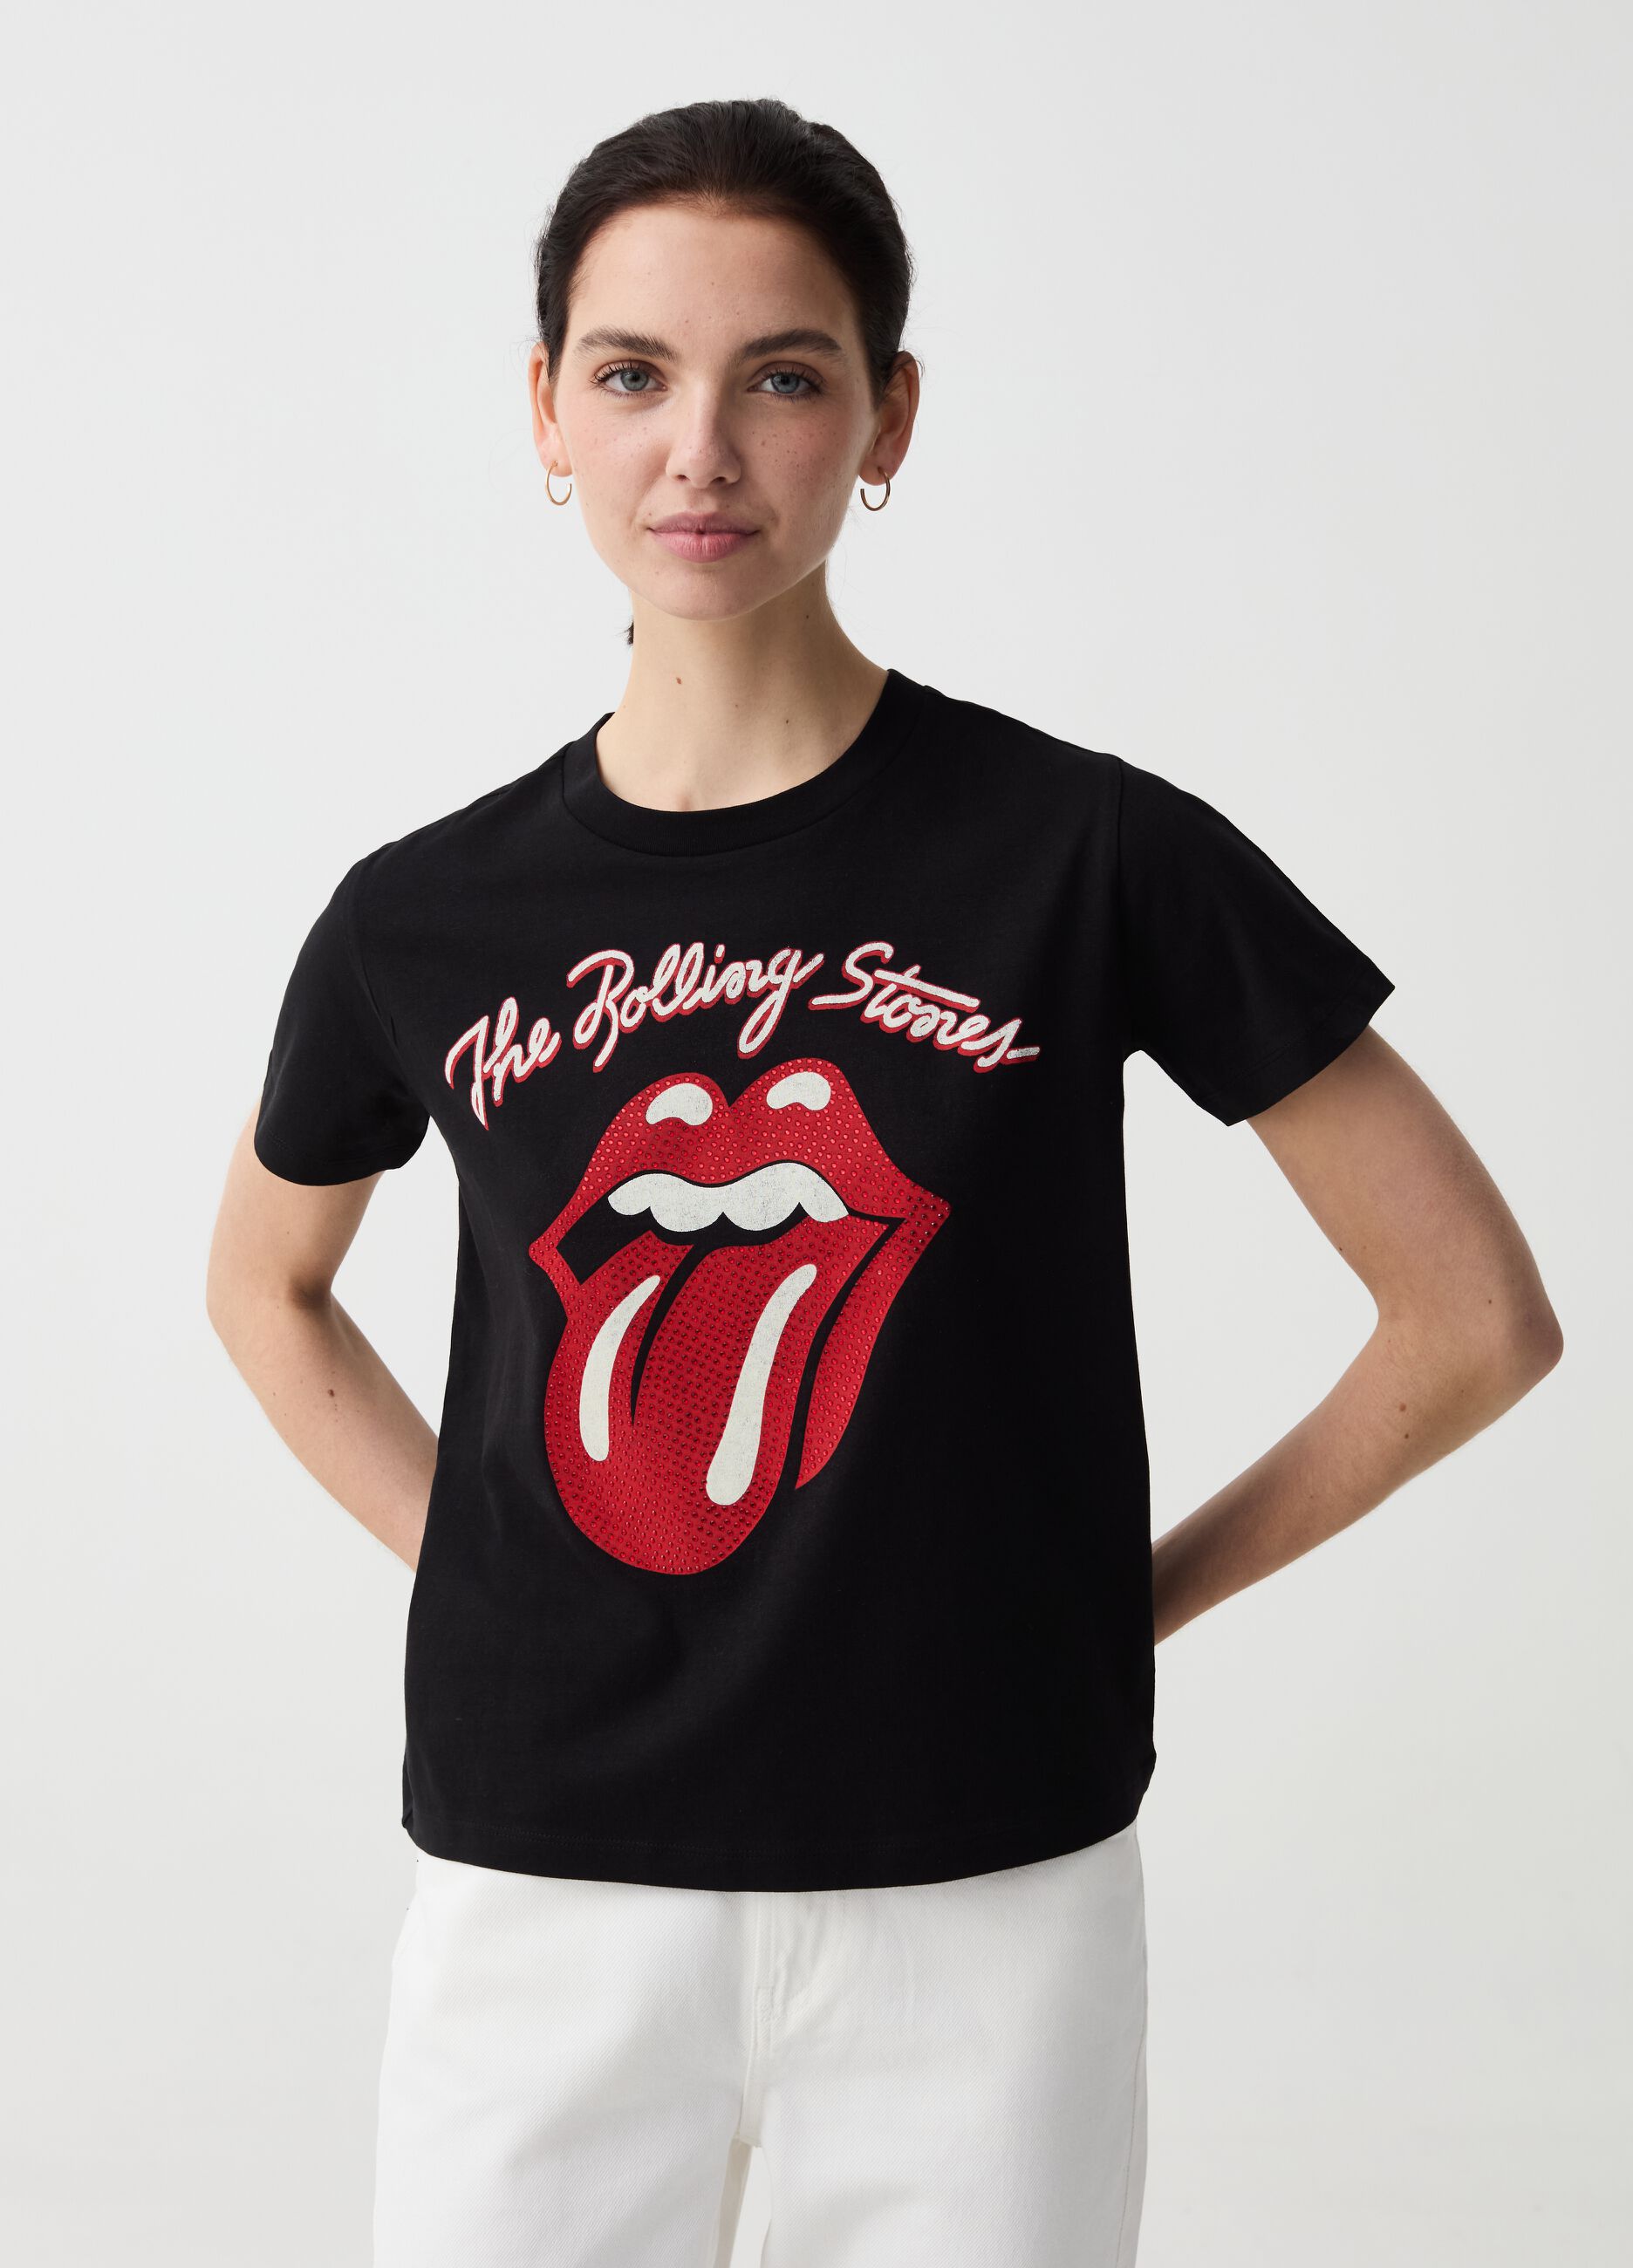 T-shirt stampa logo Rolling Stones con strass